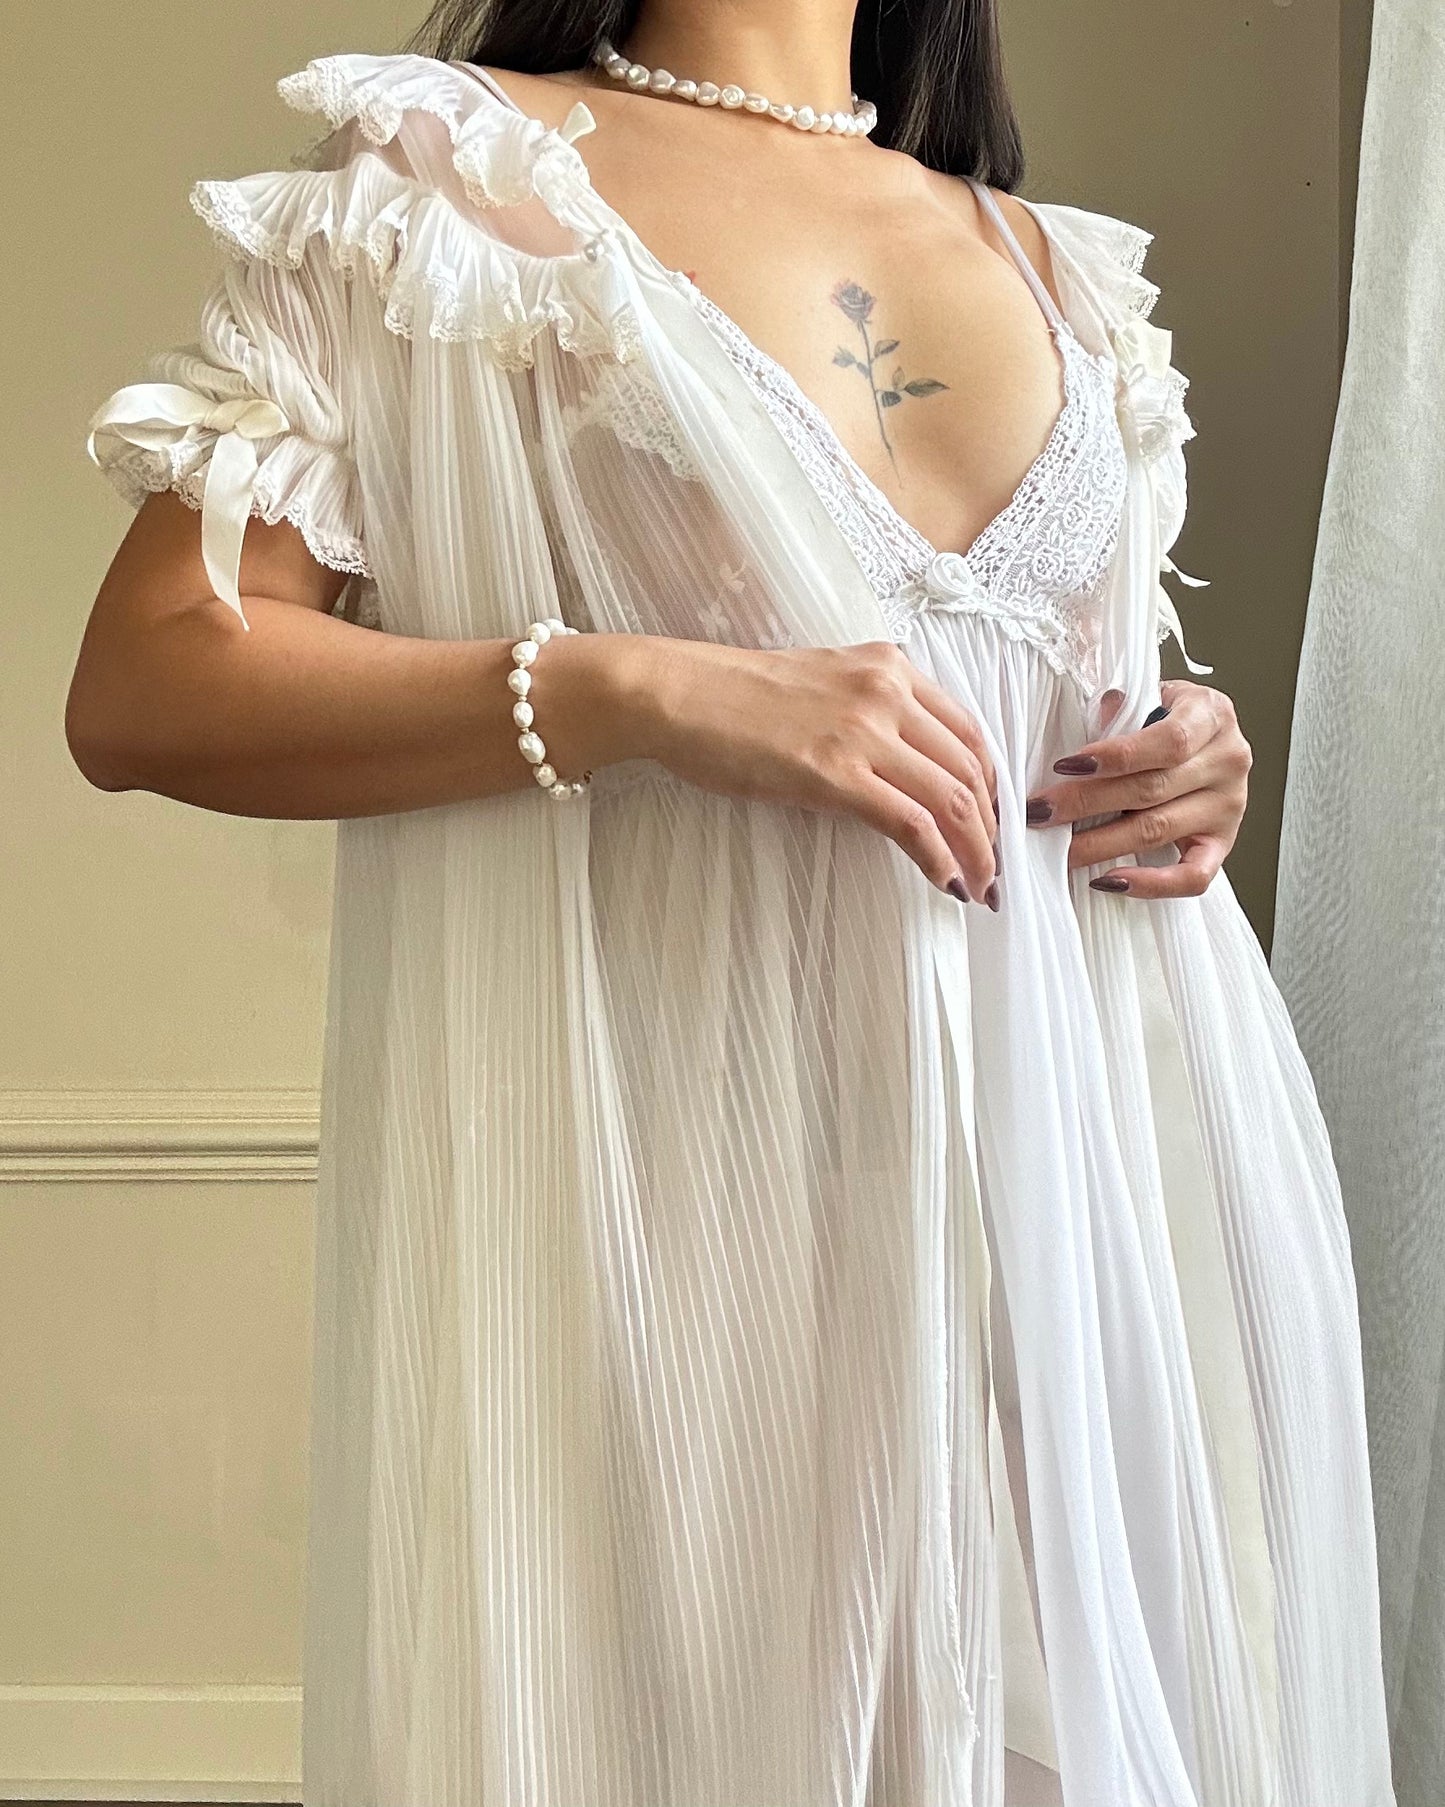 Victorian Inspired Sheer White Robes featuring Double Layered Ruffles Collar